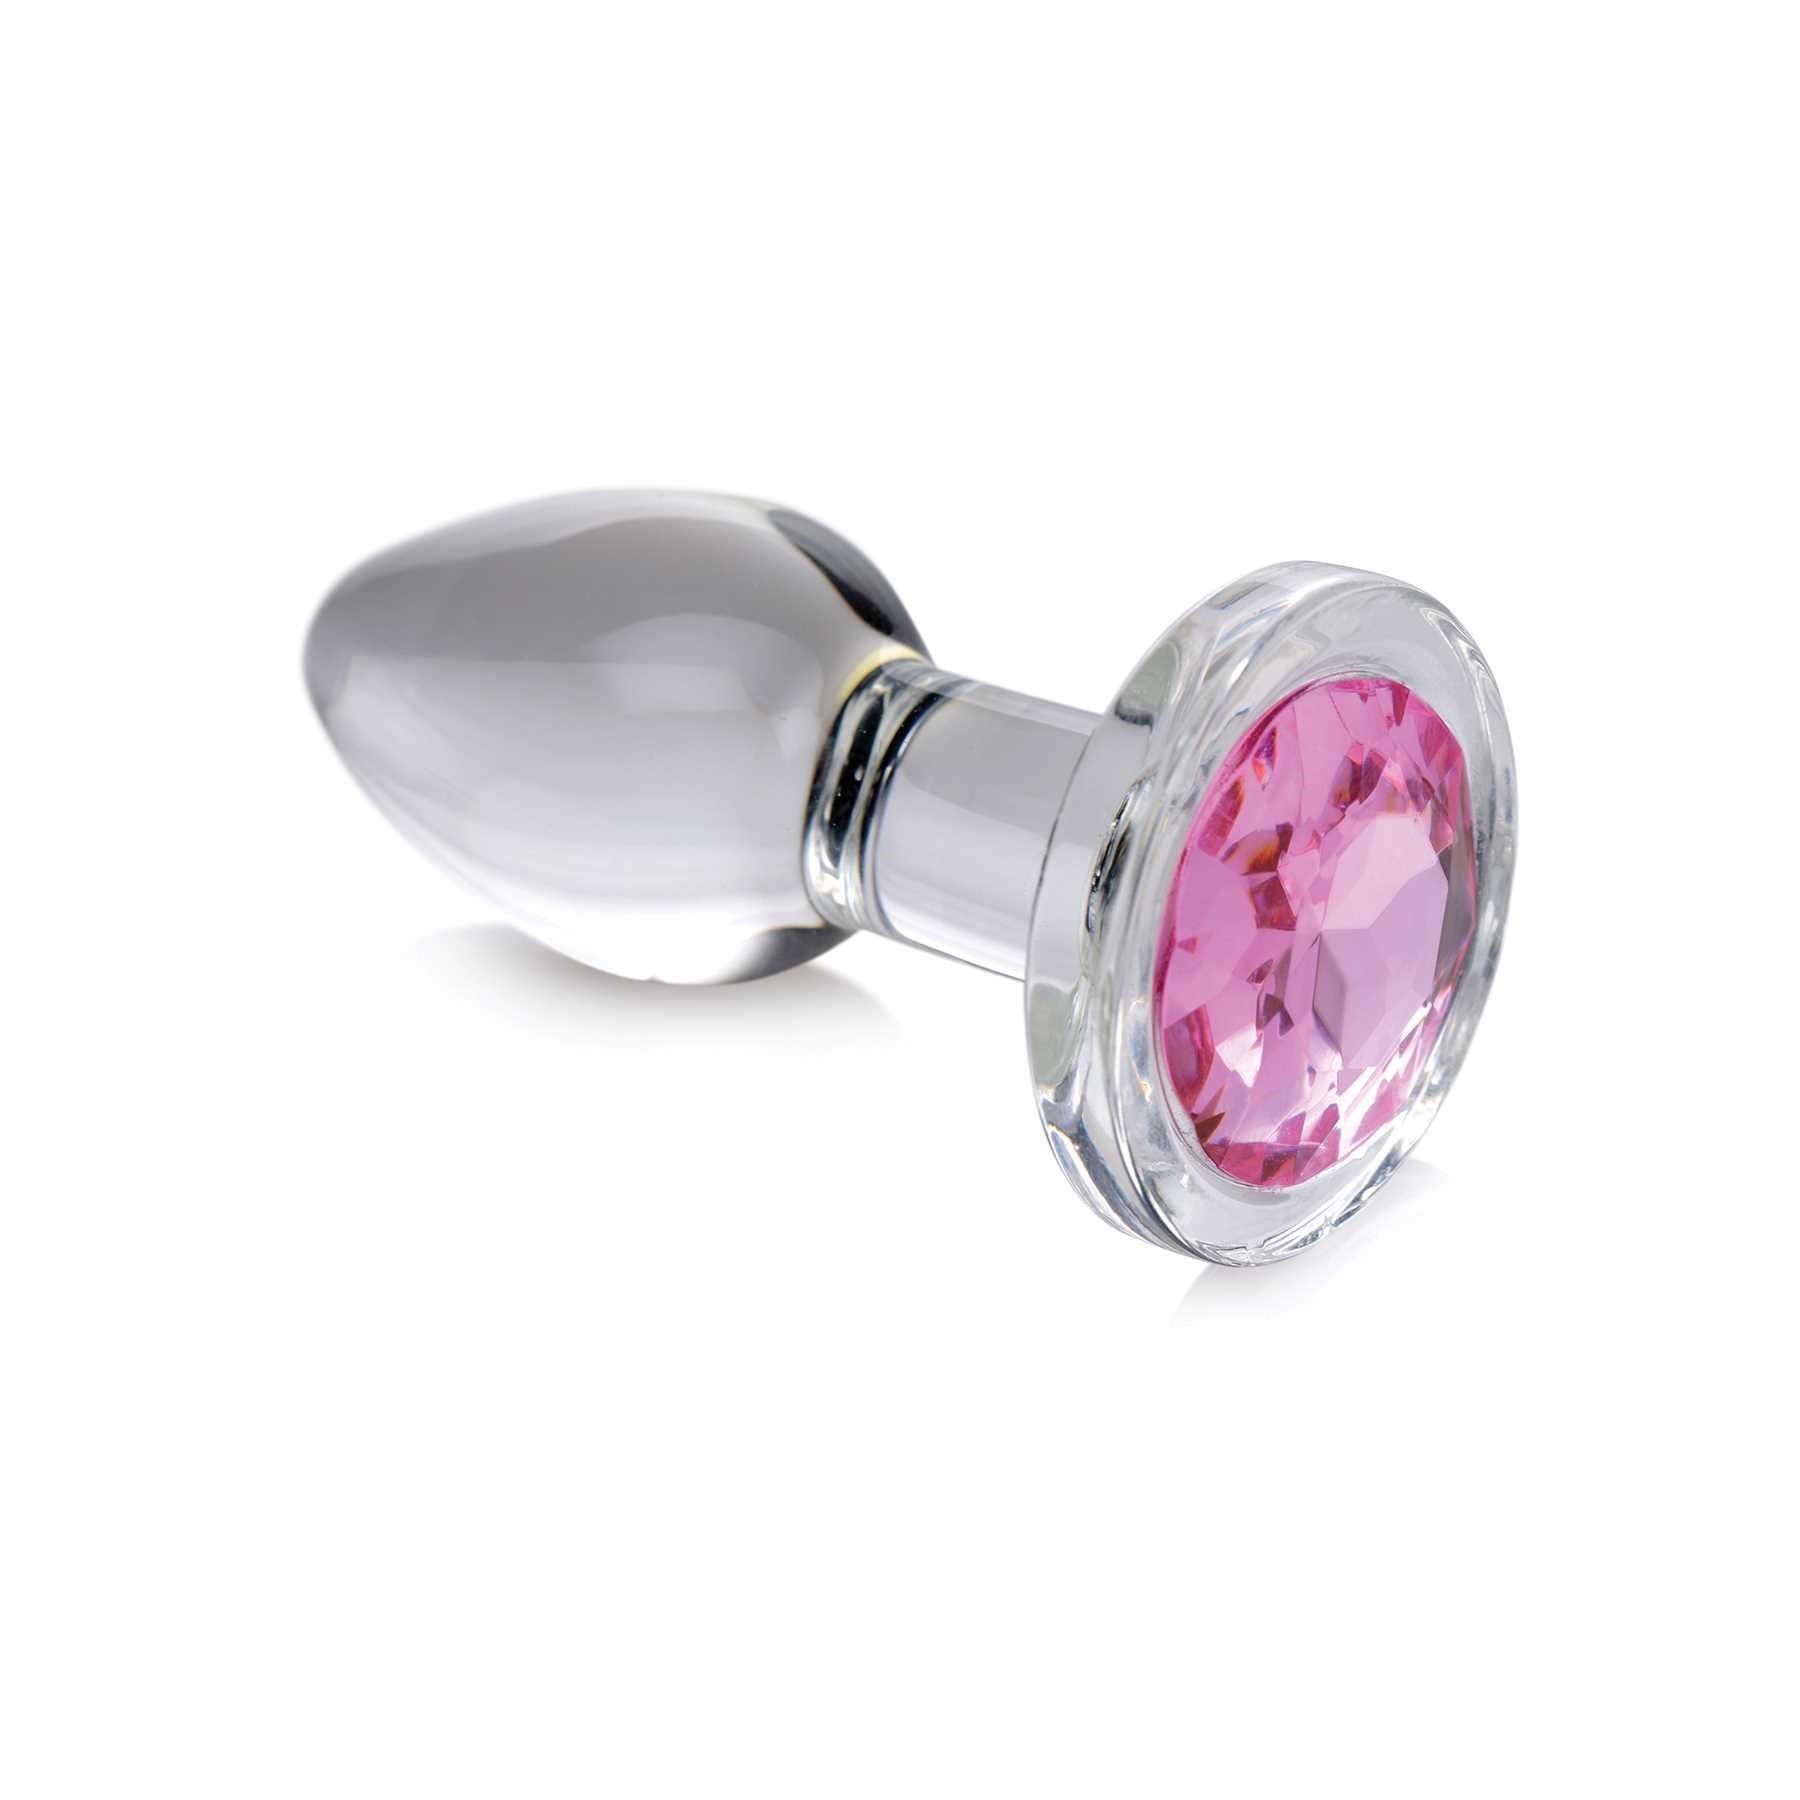 Booty Sparks Pink Gem Glass Anal Plug angled view small size
